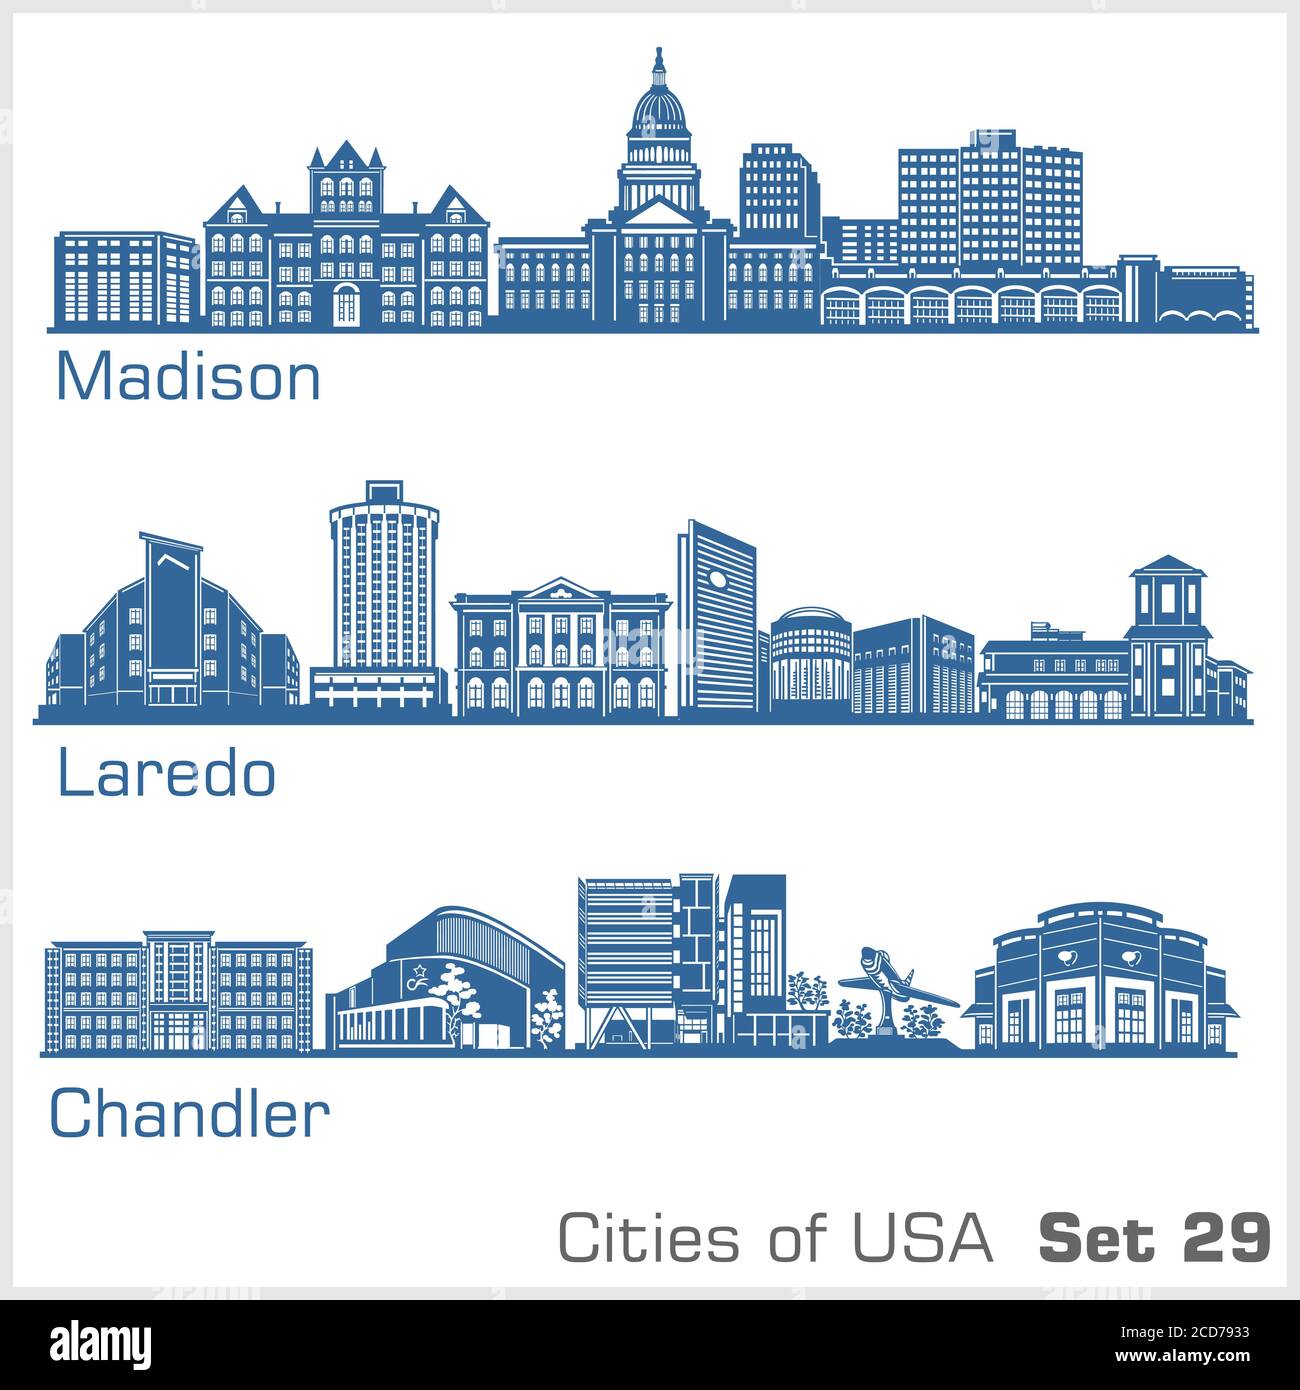 Cities of USA - Madison, Laredo, Chandler. Detailed architecture. Trendy vector illustration. Stock Vector